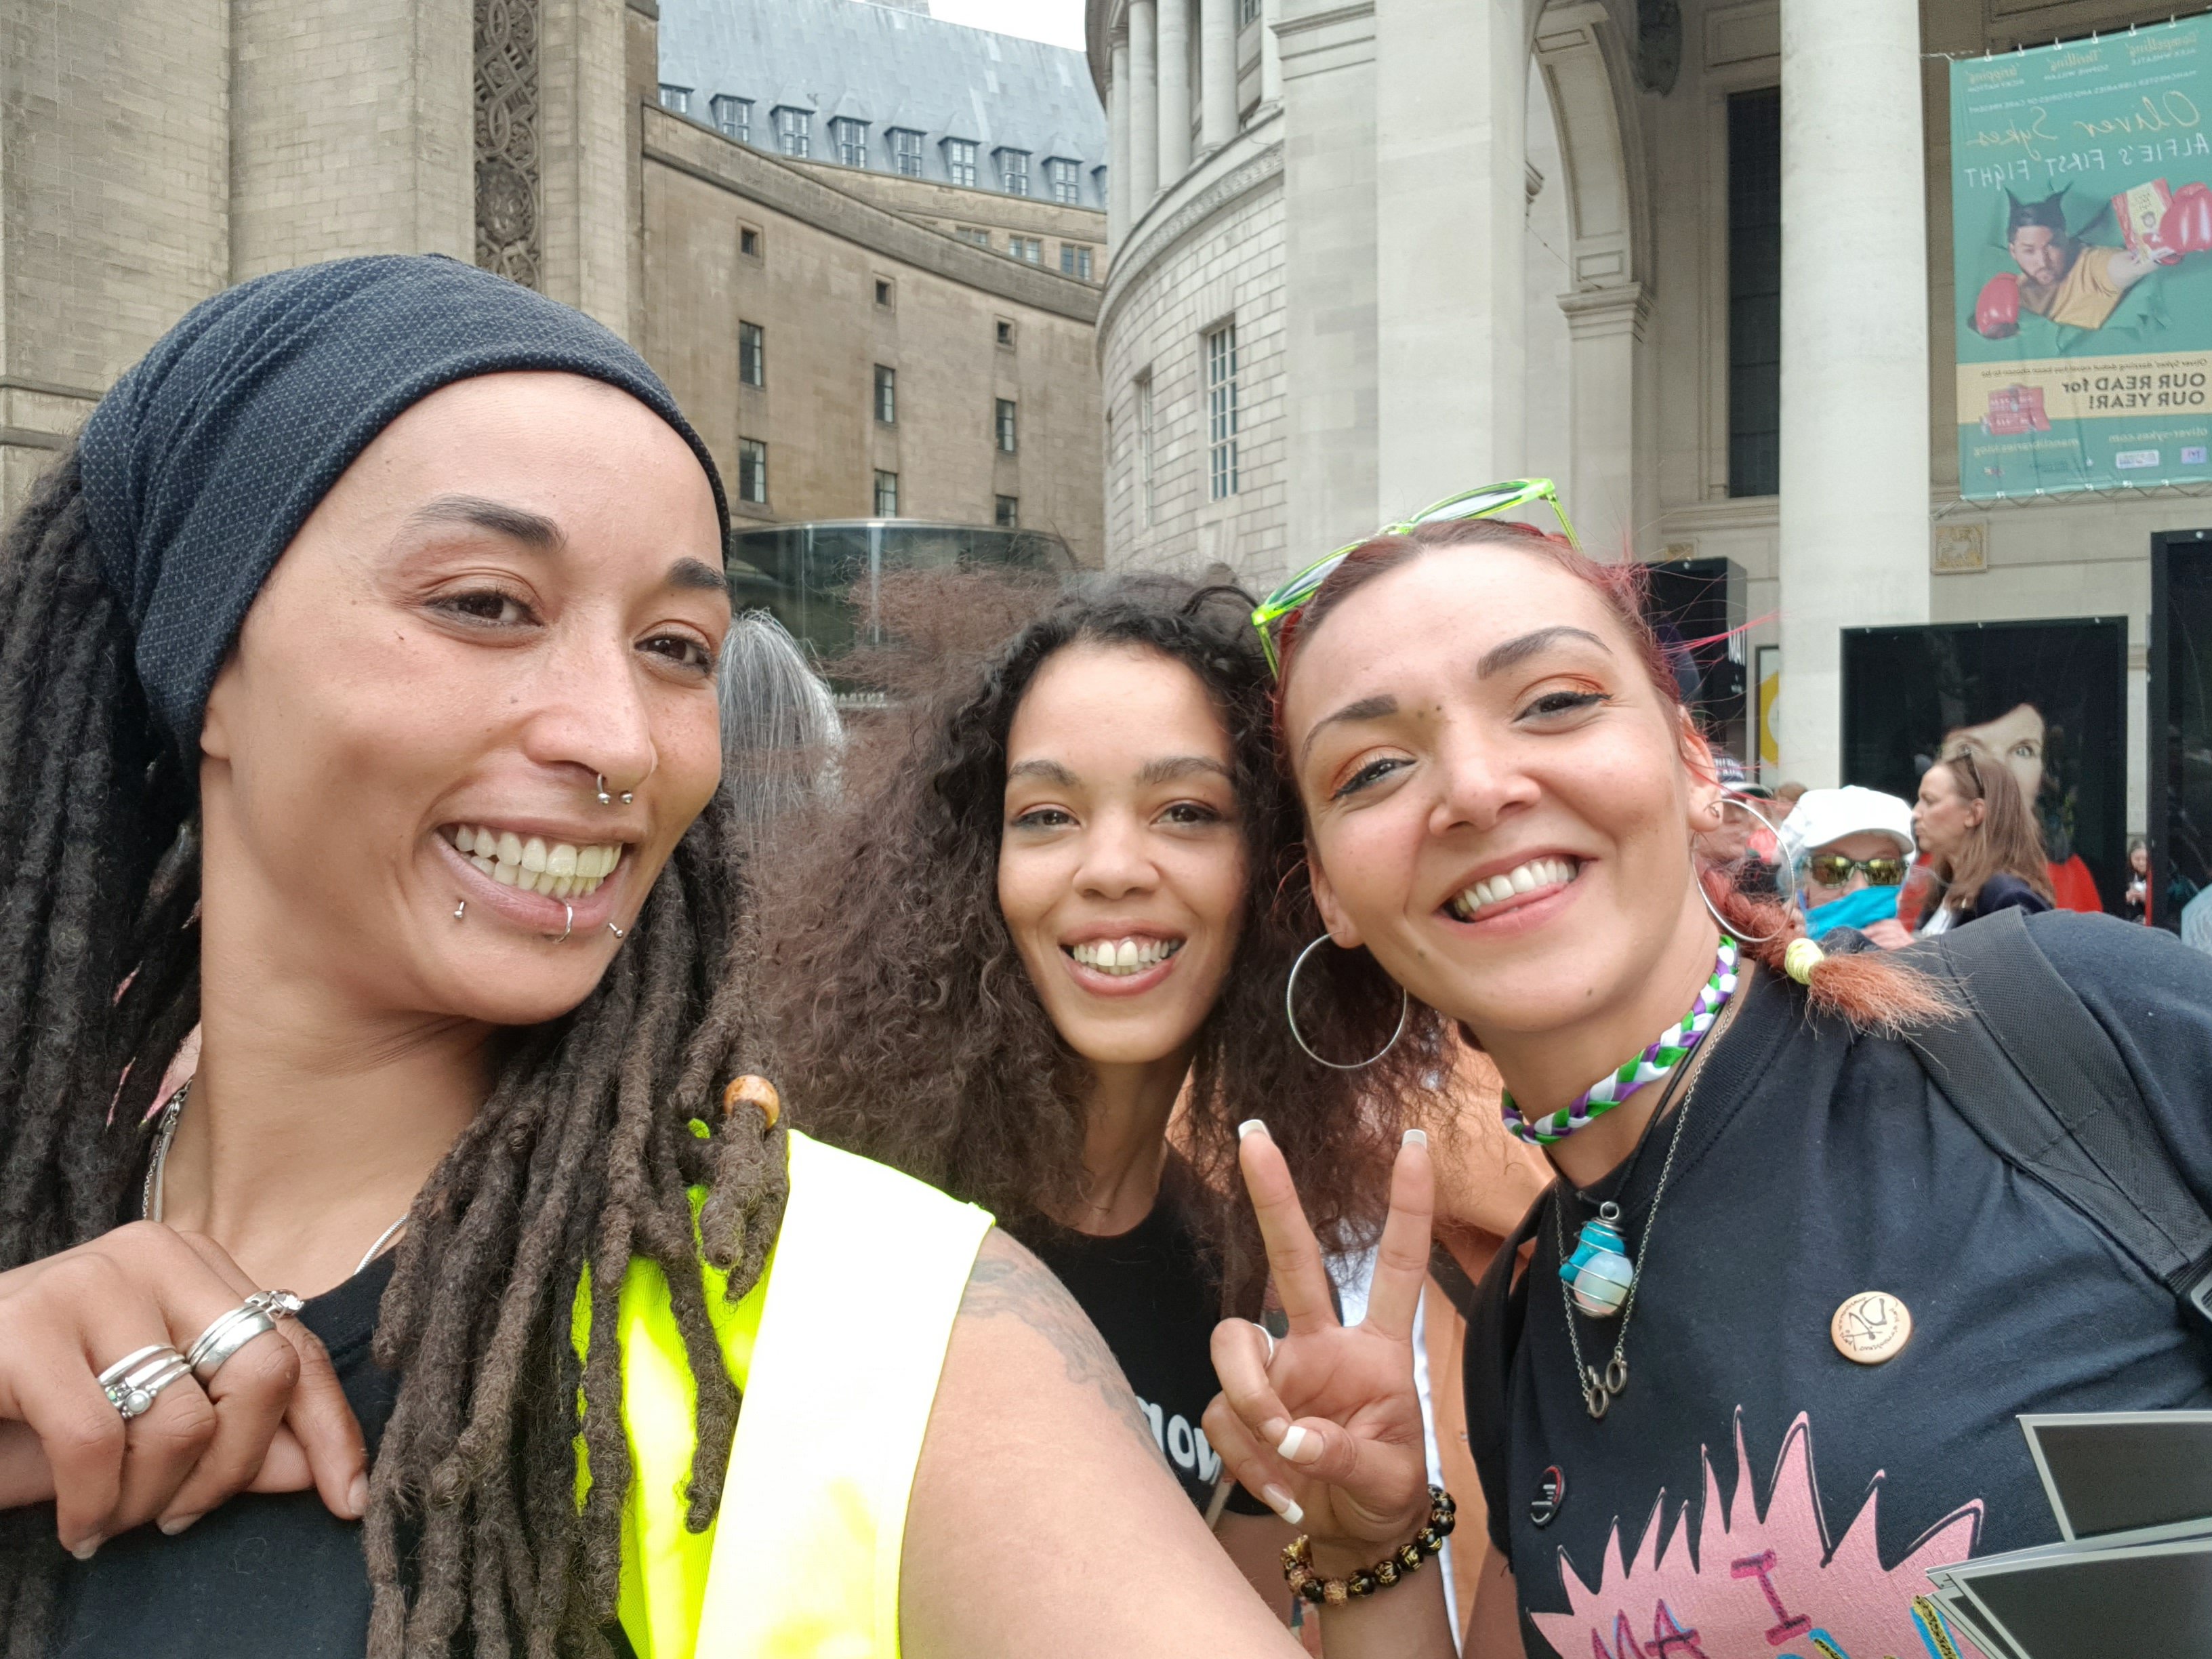 Aja🇯🇲🇬🇧 ⚢💚🤍💜🦖 on Twitter: "Two pics from today's event.. one from  our side one from theirs. •Pic one happy smilly women standing up and  together for our rights •Pic two lone man